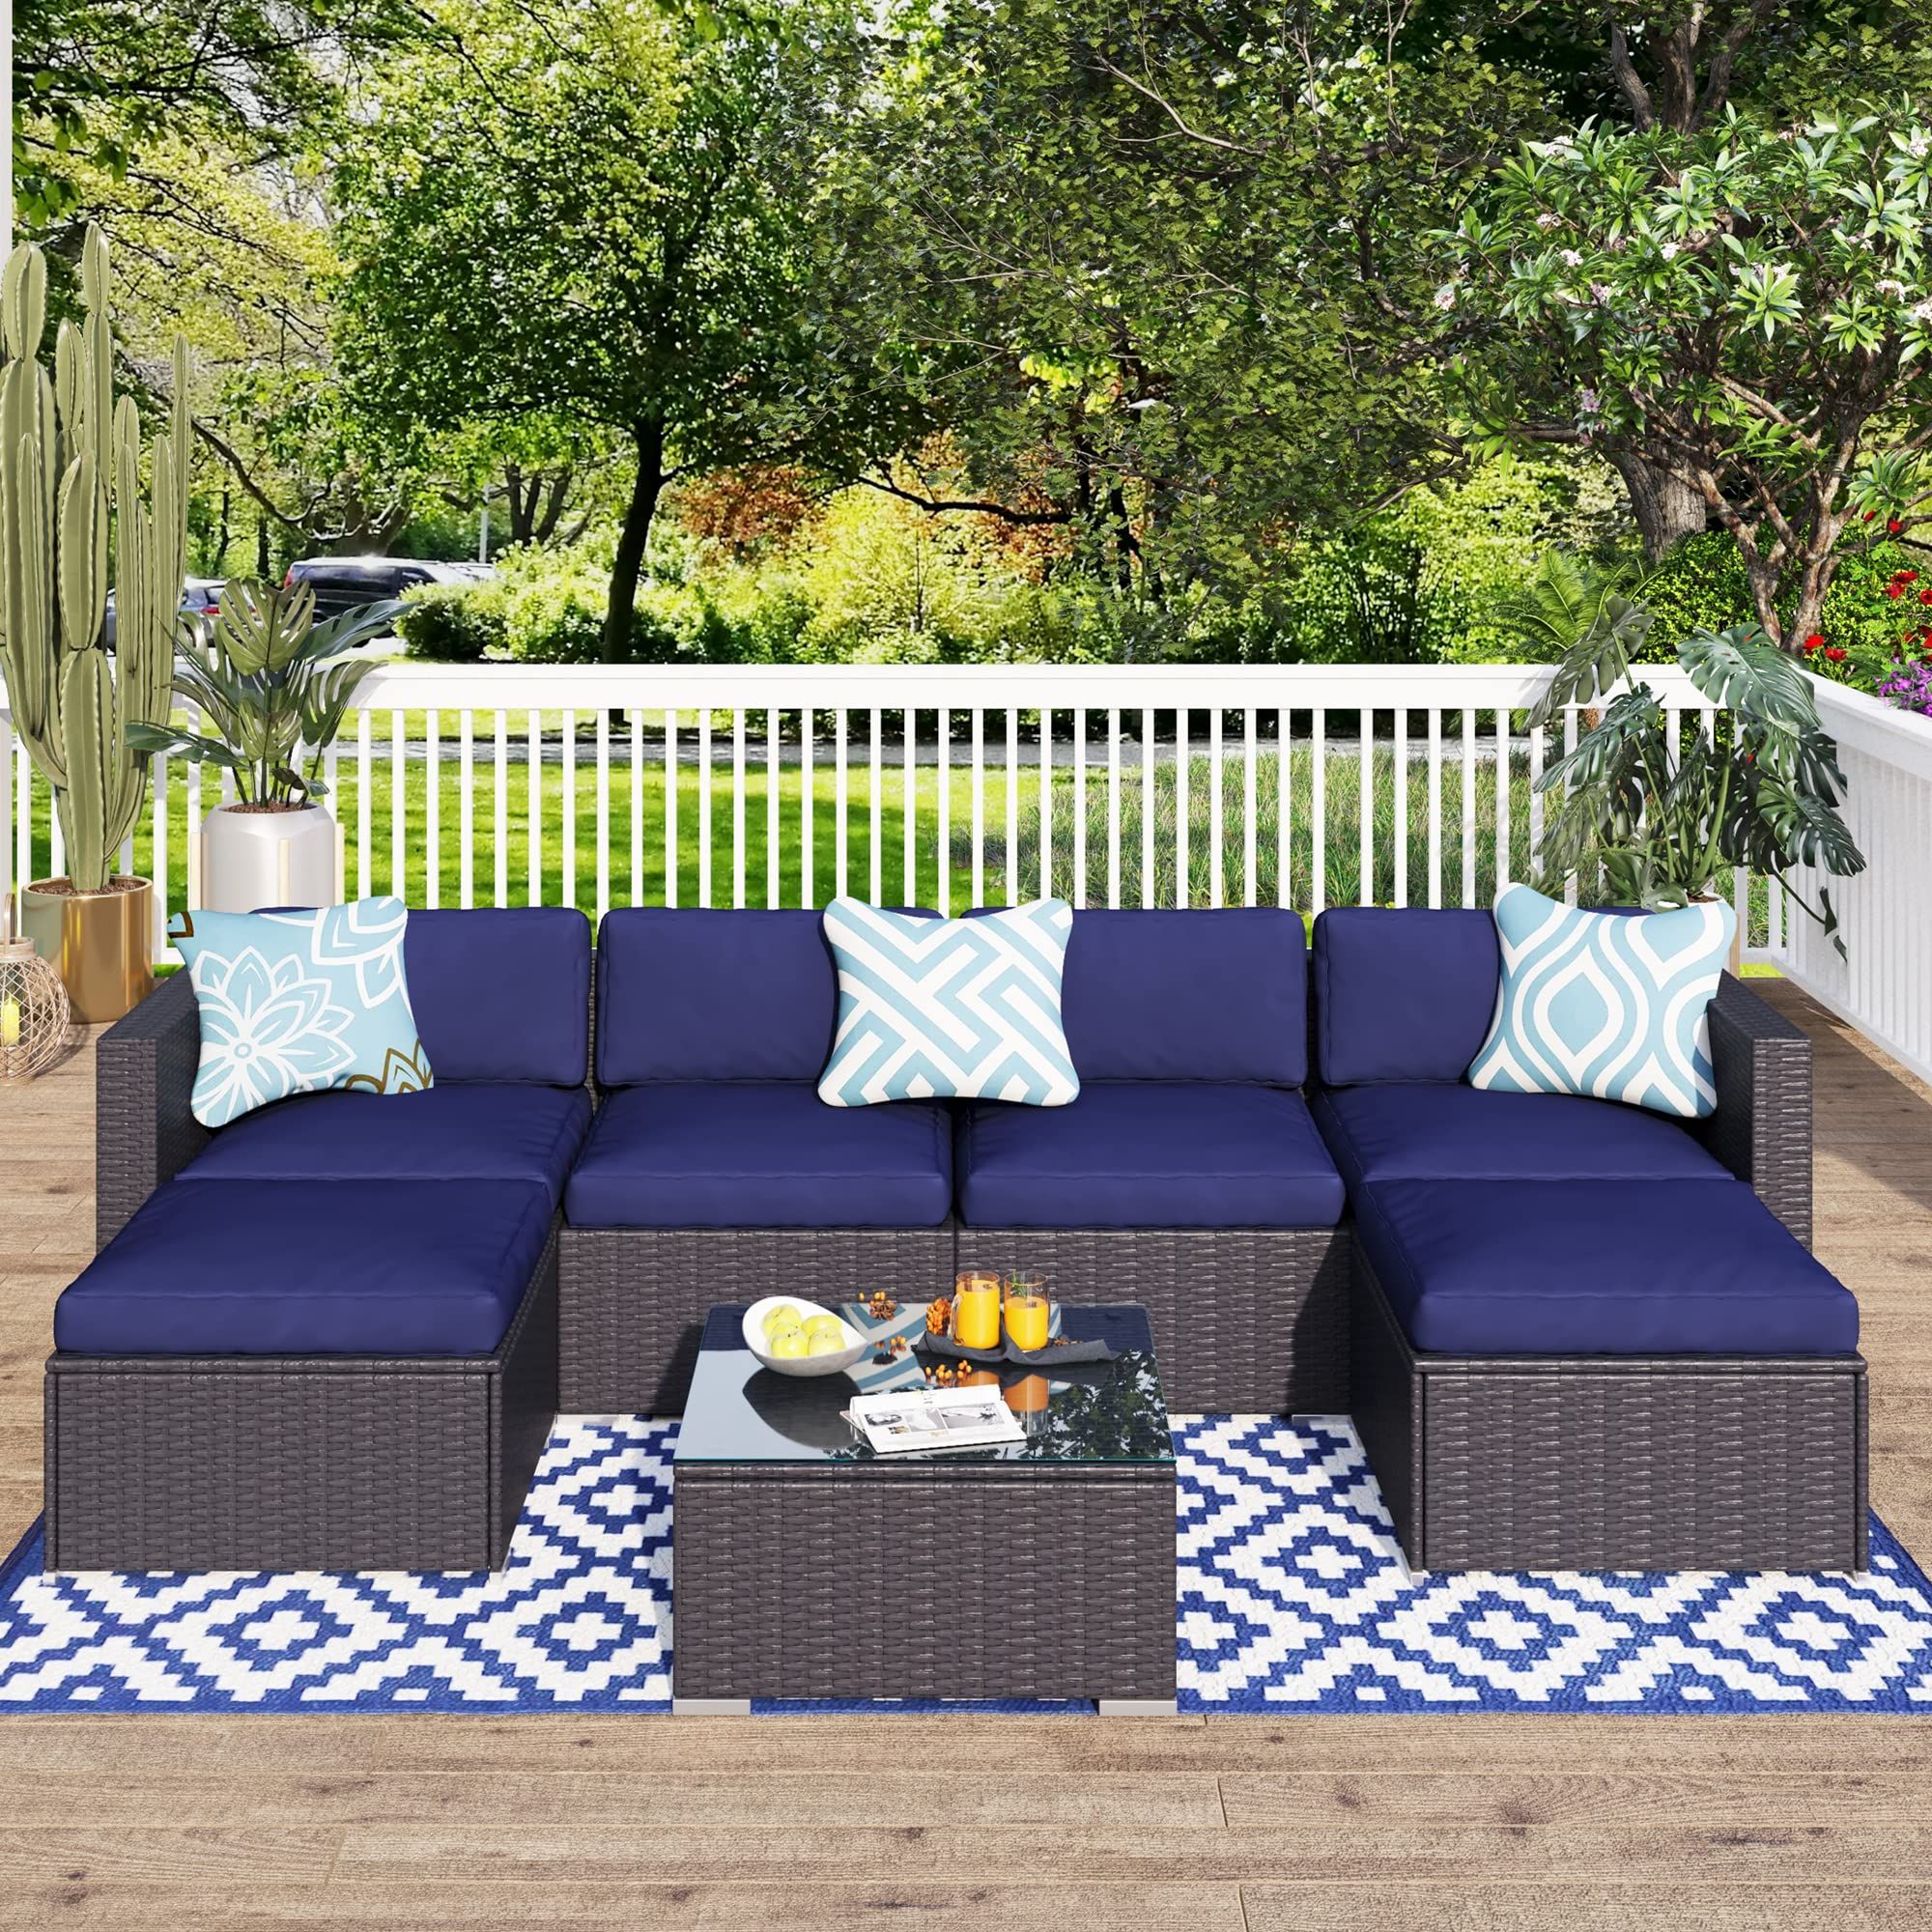 Newest Amazon: Mfstudio Outdoor Patio Furniture Set,7 Pieces All Weather  Wicker Outdoor Couch Sectional Sofa,rattan Patio Conversation Set With  Coffee Table, Blue Washable Cushion : Patio, Lawn & Garden Inside All Weather Rattan Conversation Set (View 12 of 15)